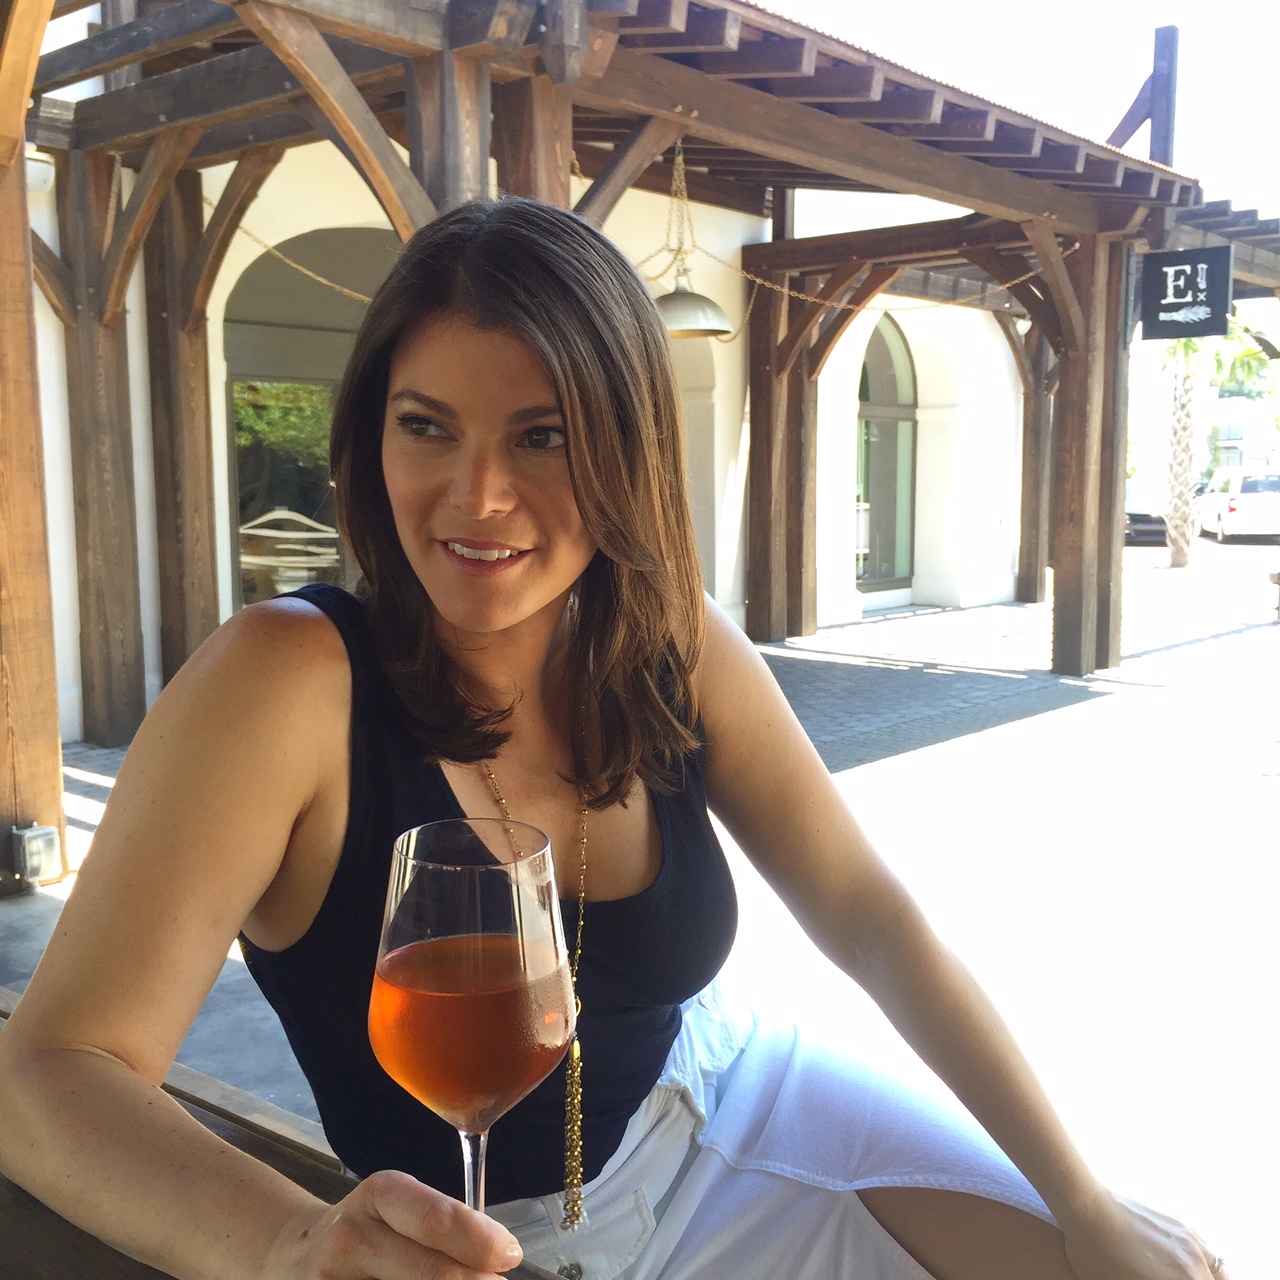 gail simmons from top chef holds glass of wine